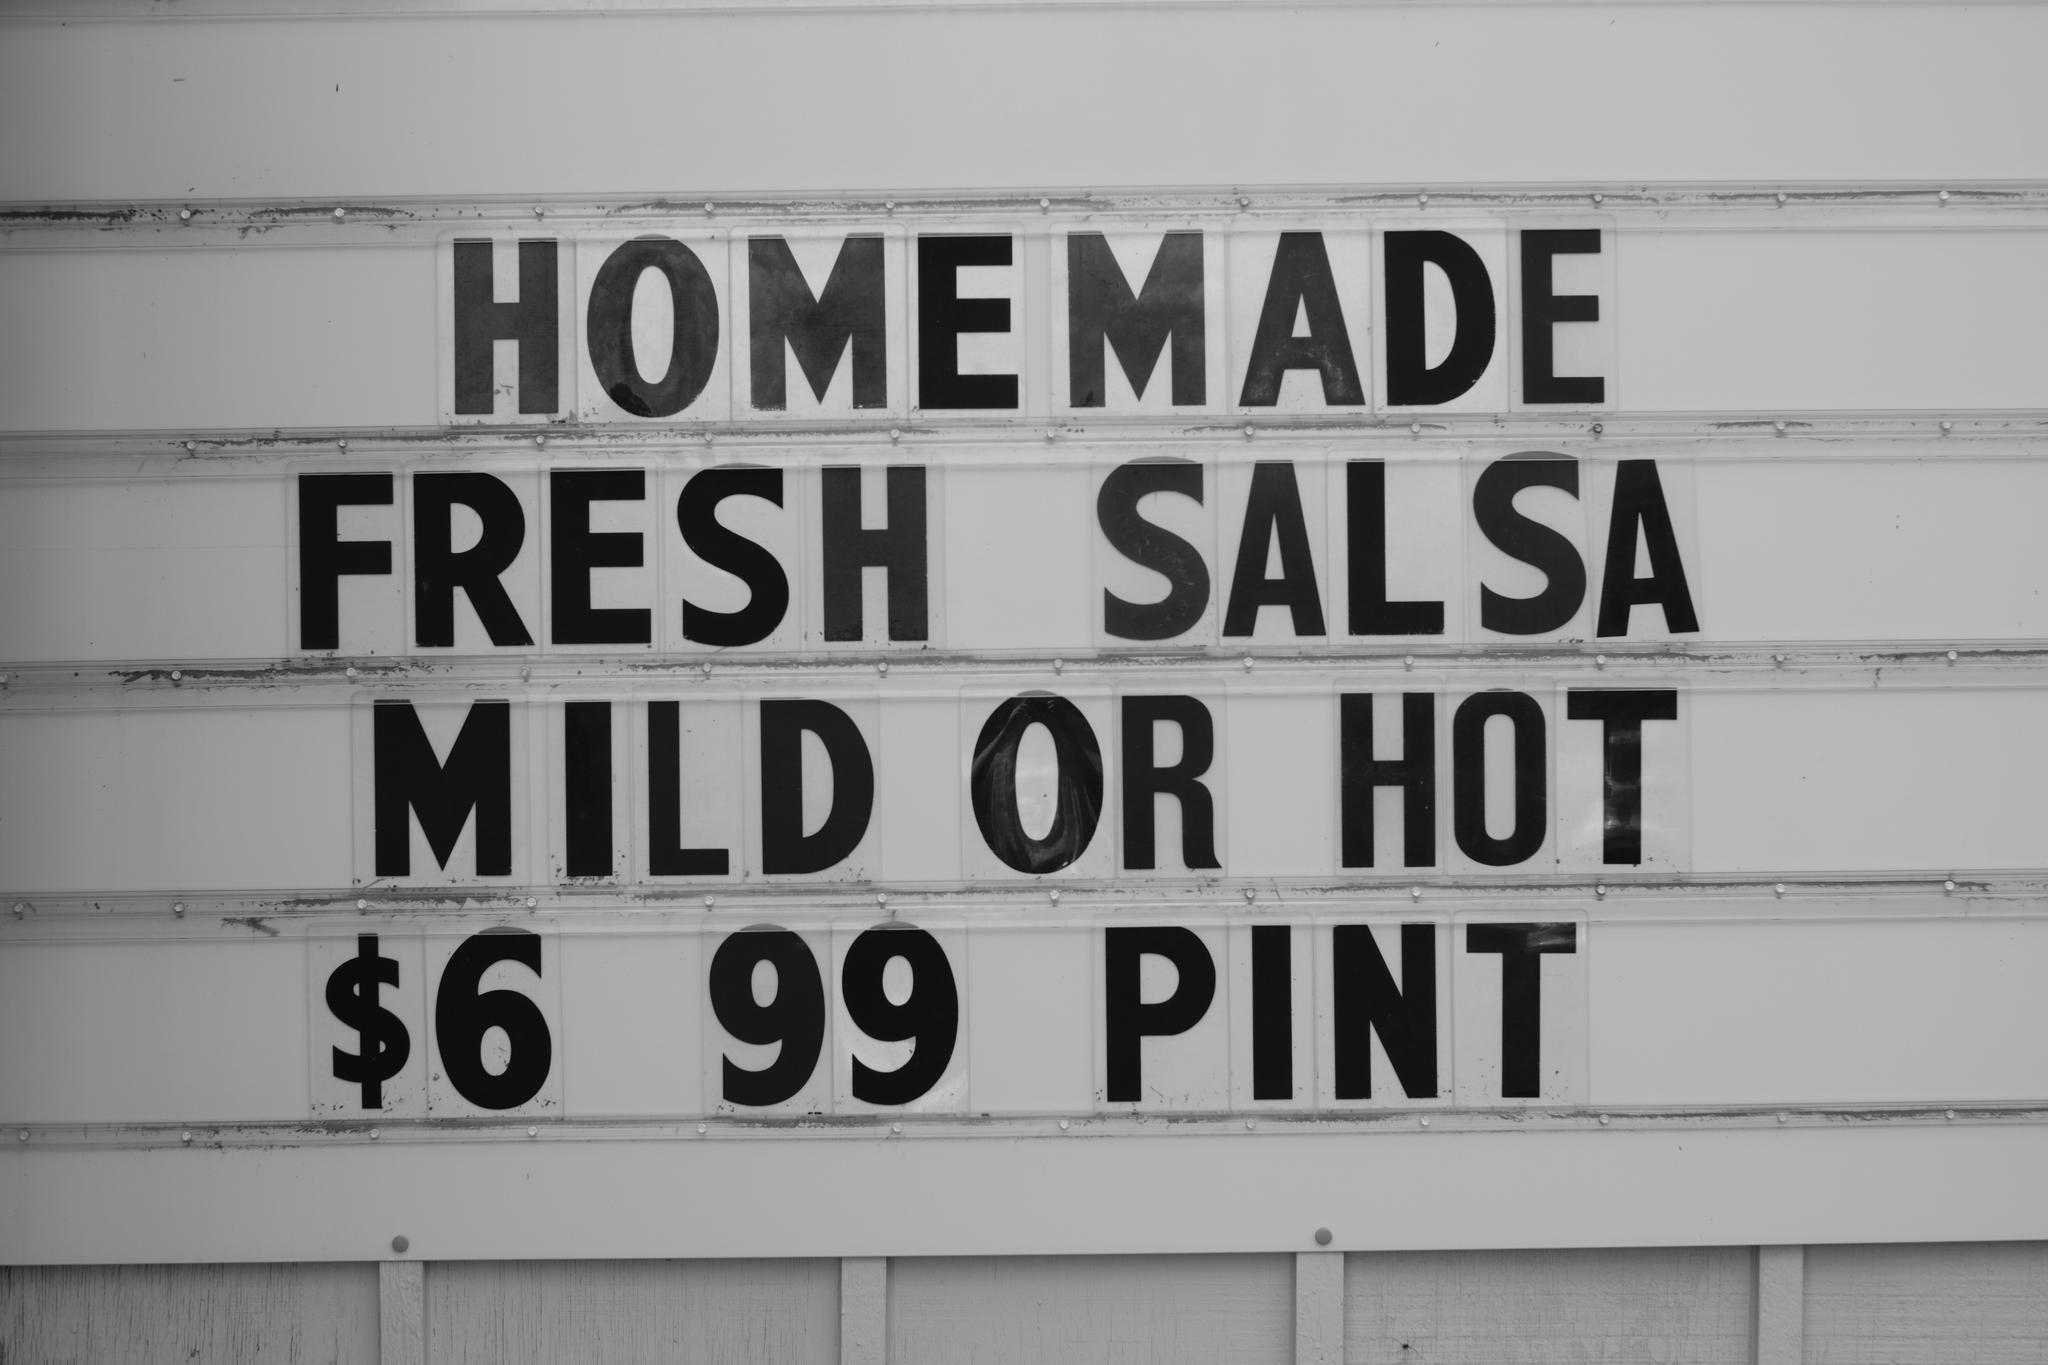 A sign advertising homemade fresh salsa, available in mild or hot, priced at $6.99 per pint